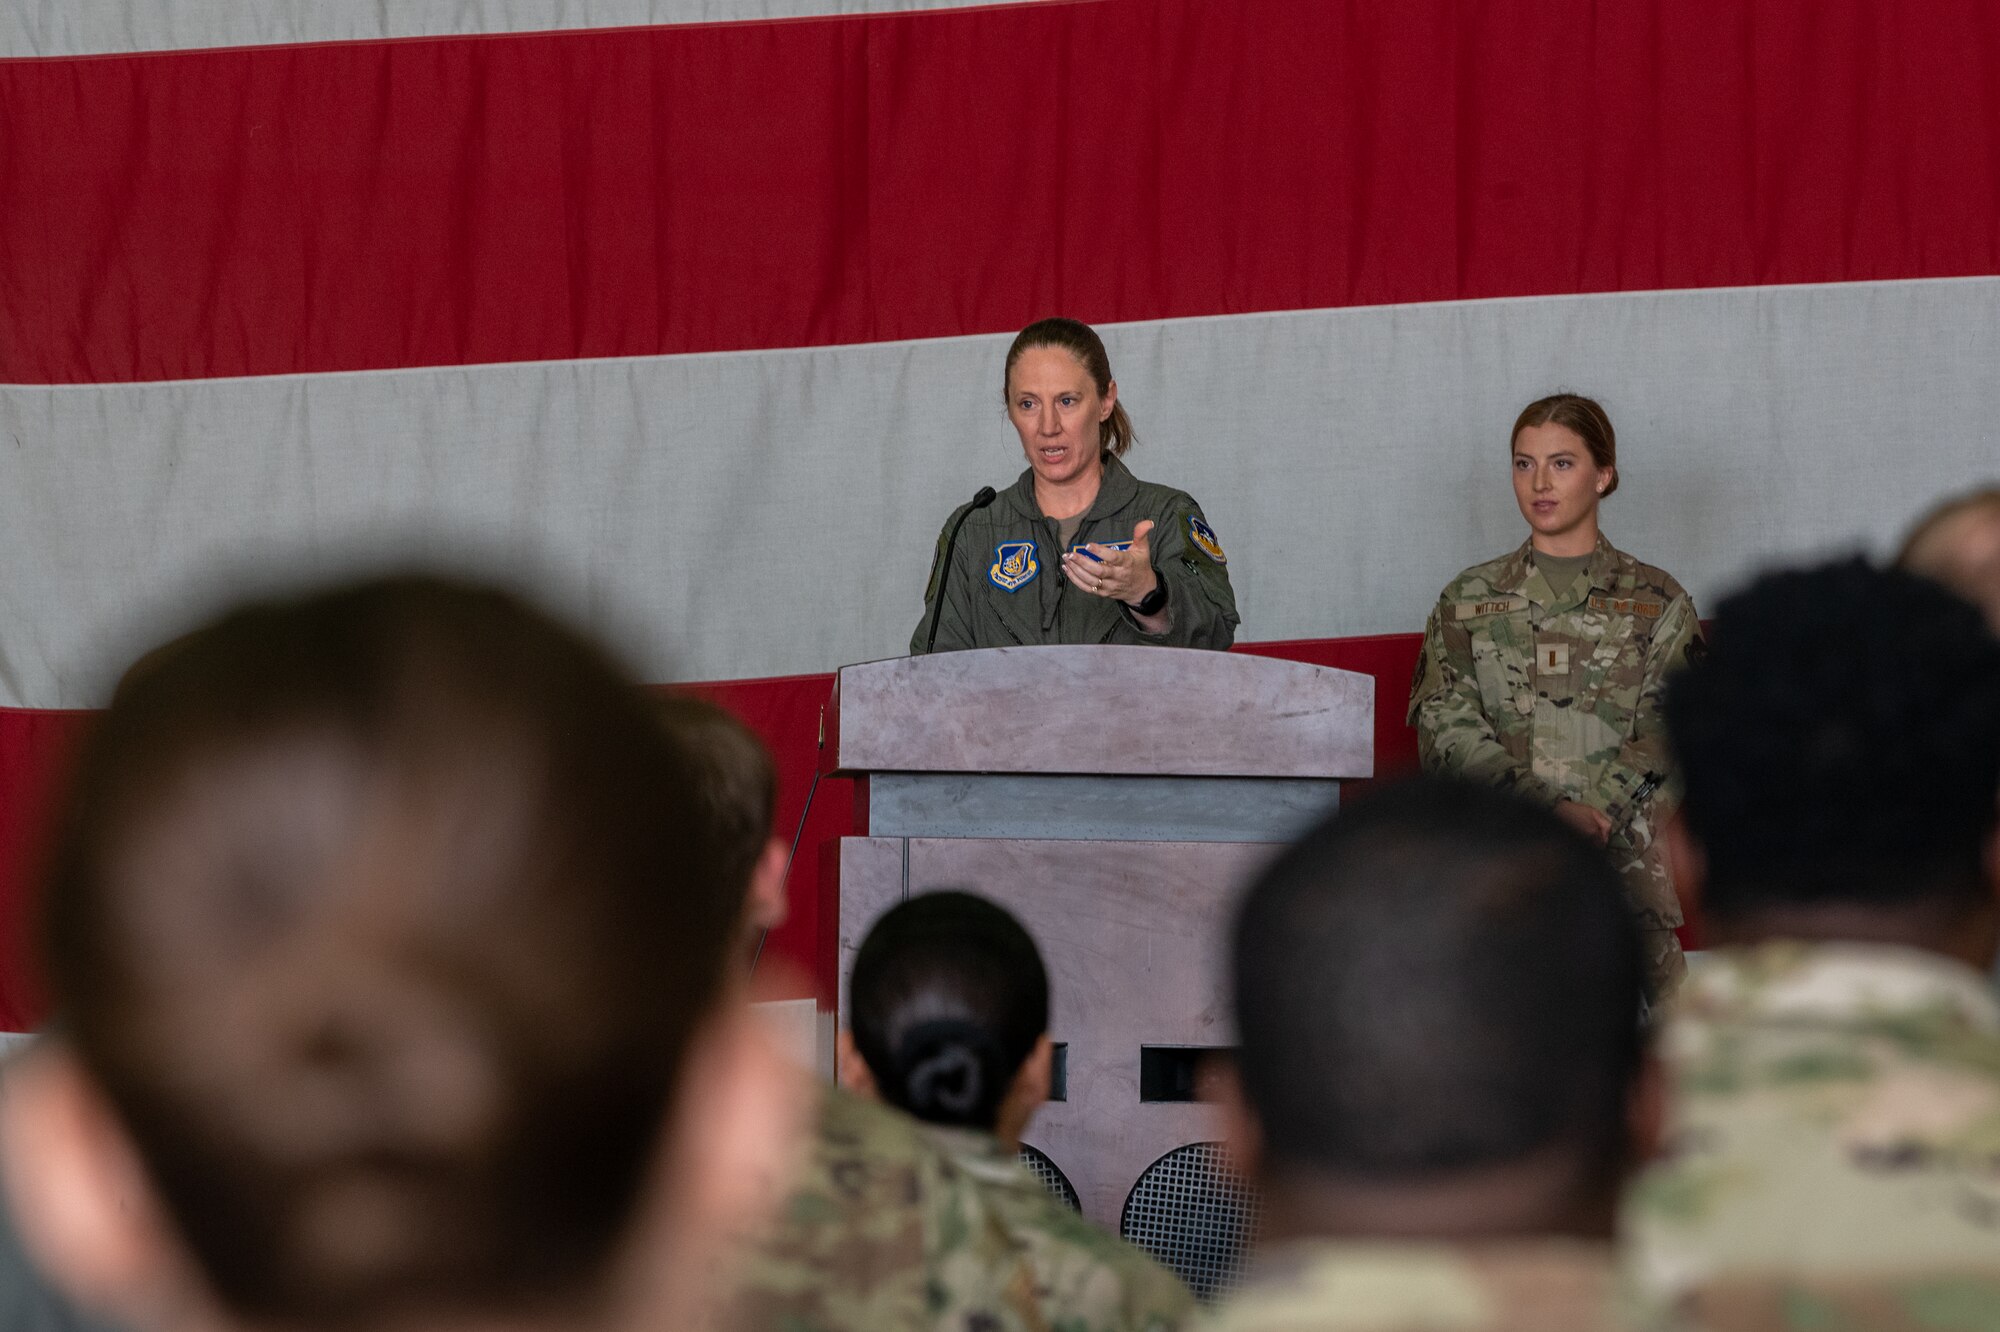 Photos of various Airmen and leadership at a change of command ceremony